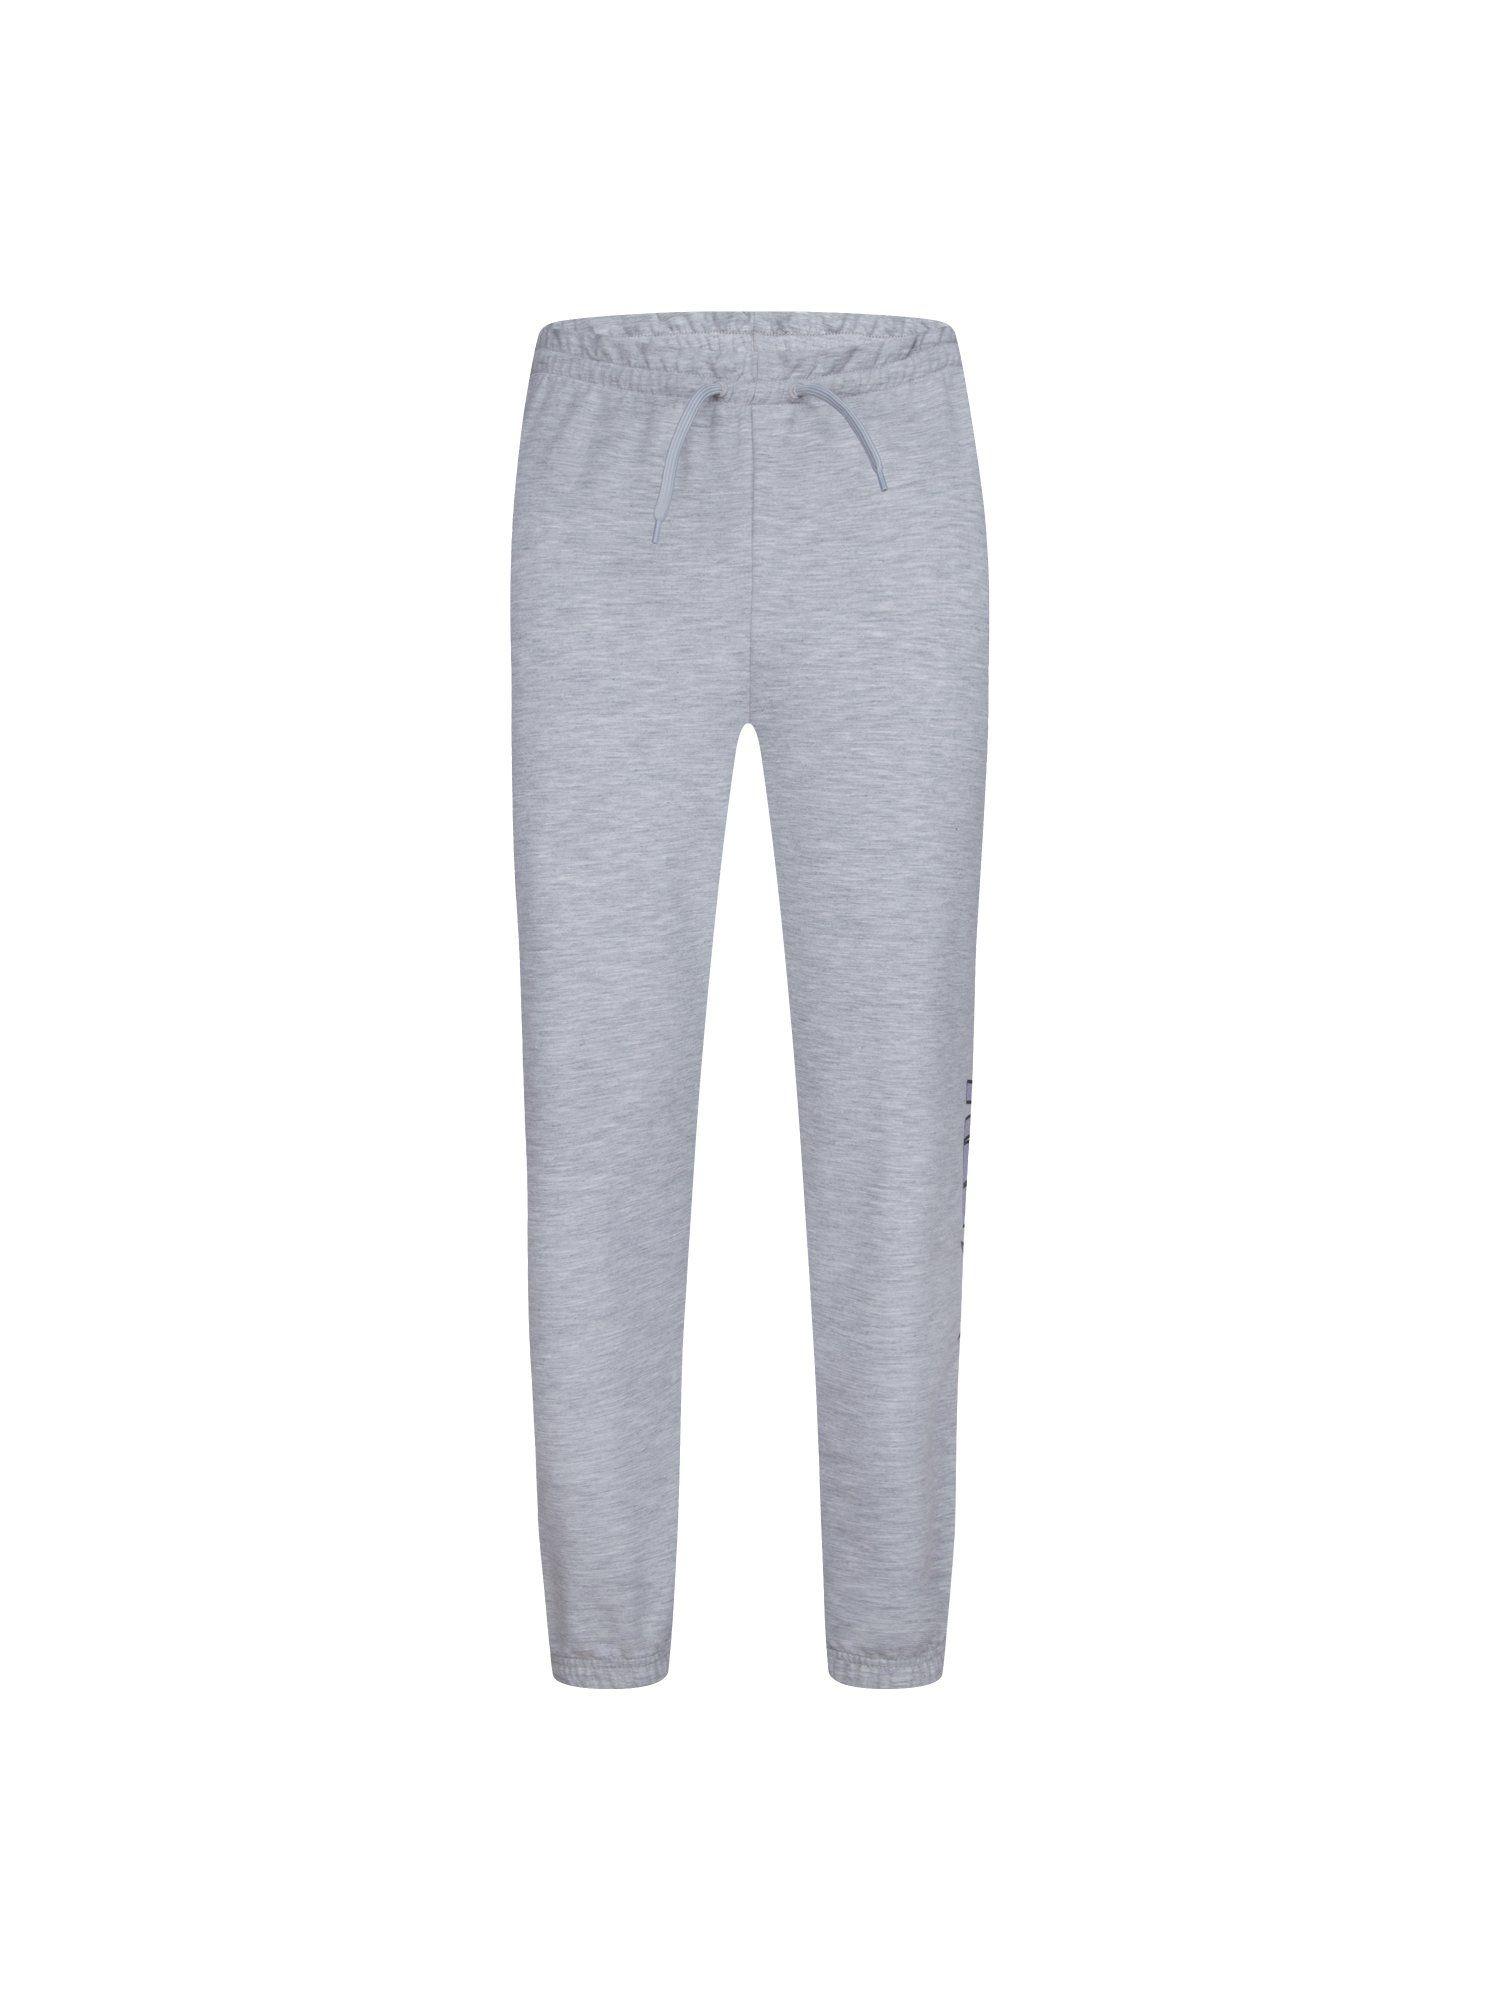 grey high rise paperbag joggers